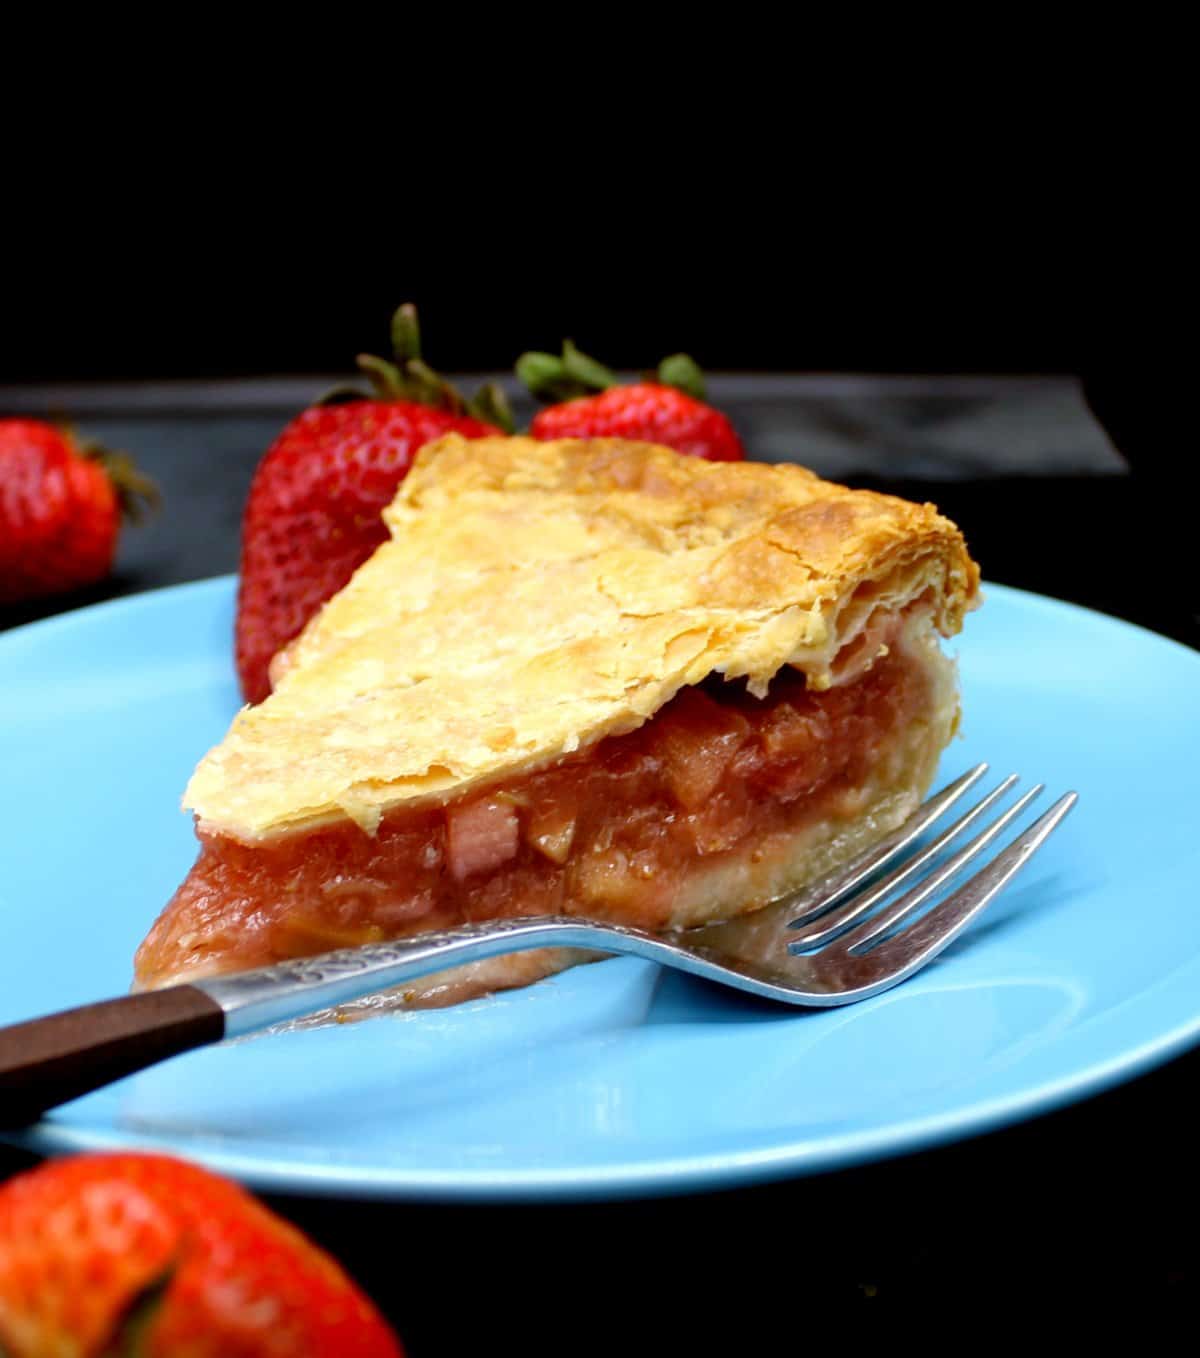 A slice of vegan pithivier with the rhubarb strawberry filling showing and a fork. On the side are more strawberries.